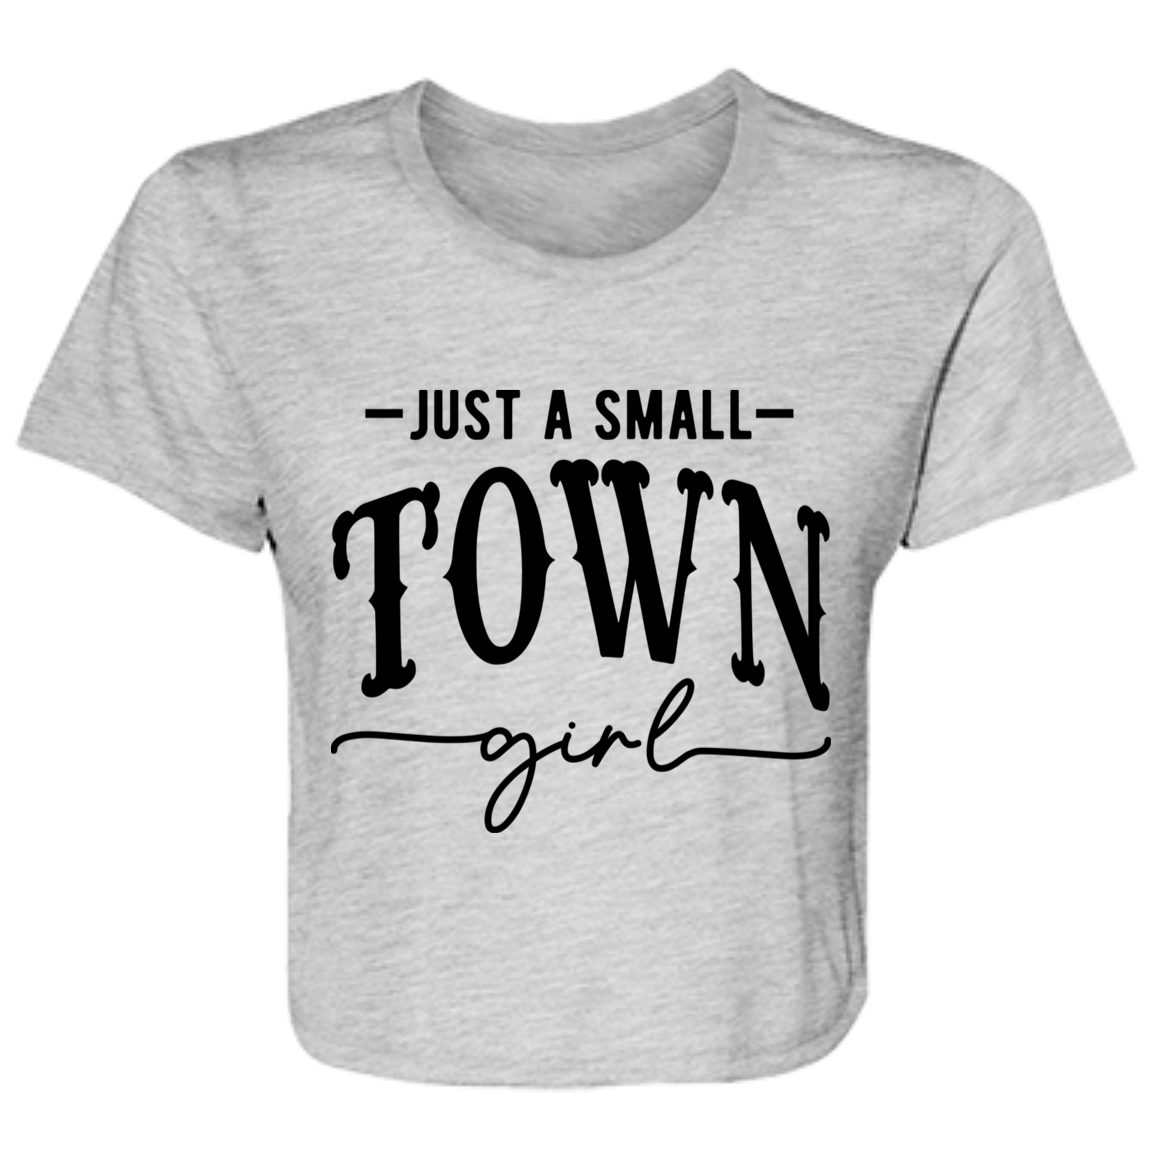 Just A Small Town Girl 2 B8882 Ladies' Flowy Cropped Tee